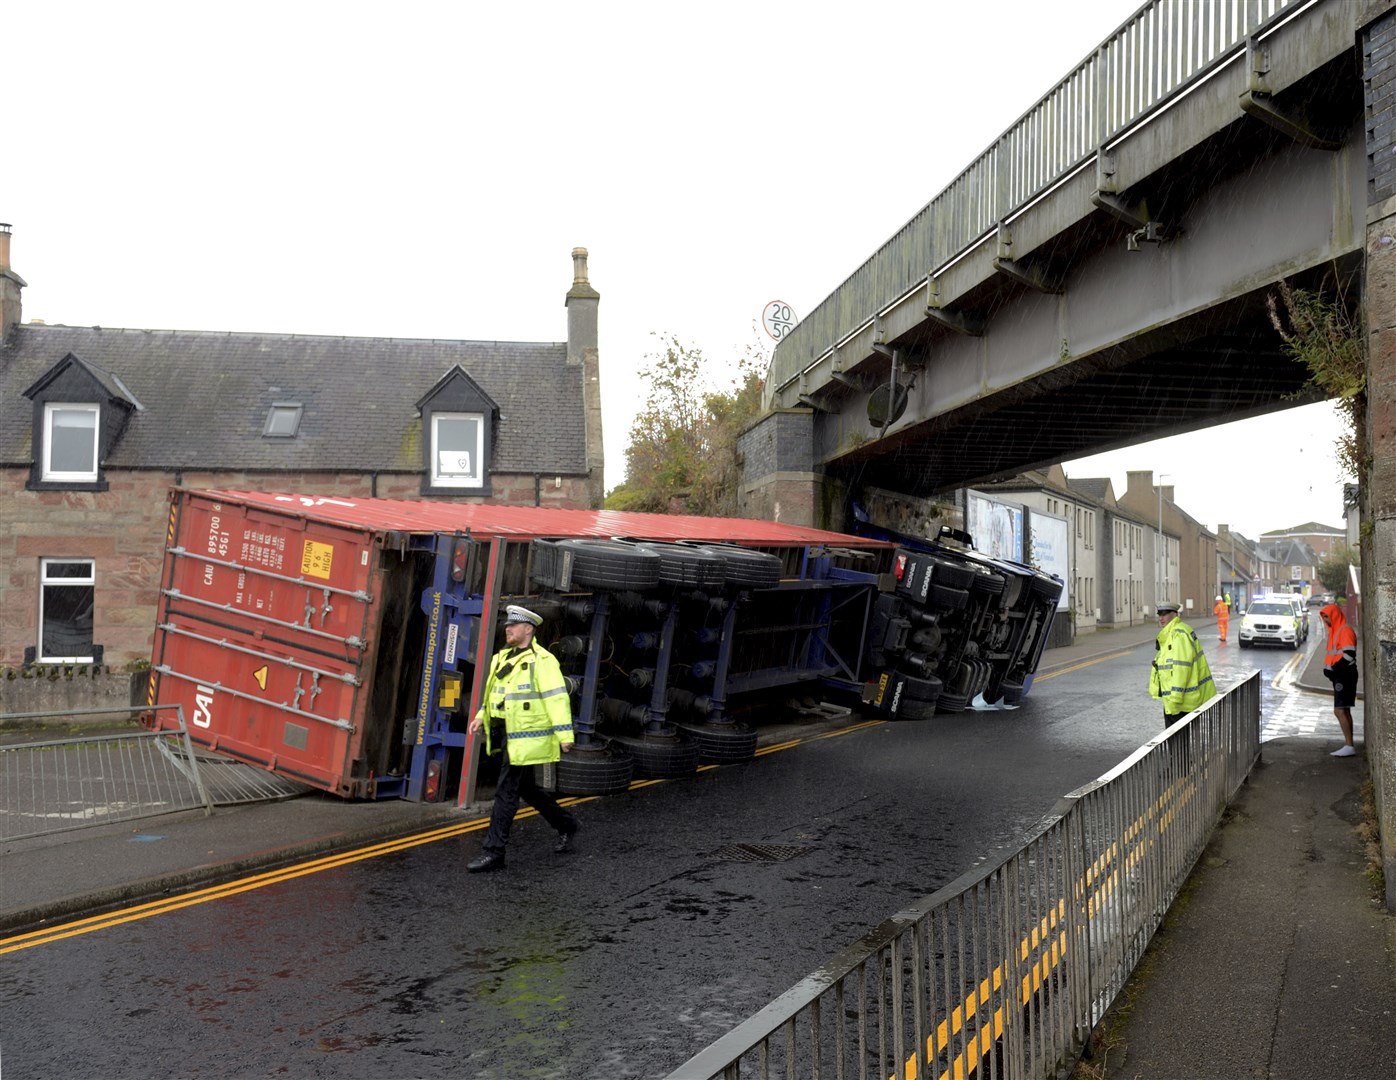 The lorry on its side in Inverness. Picture: SPP Photographer.